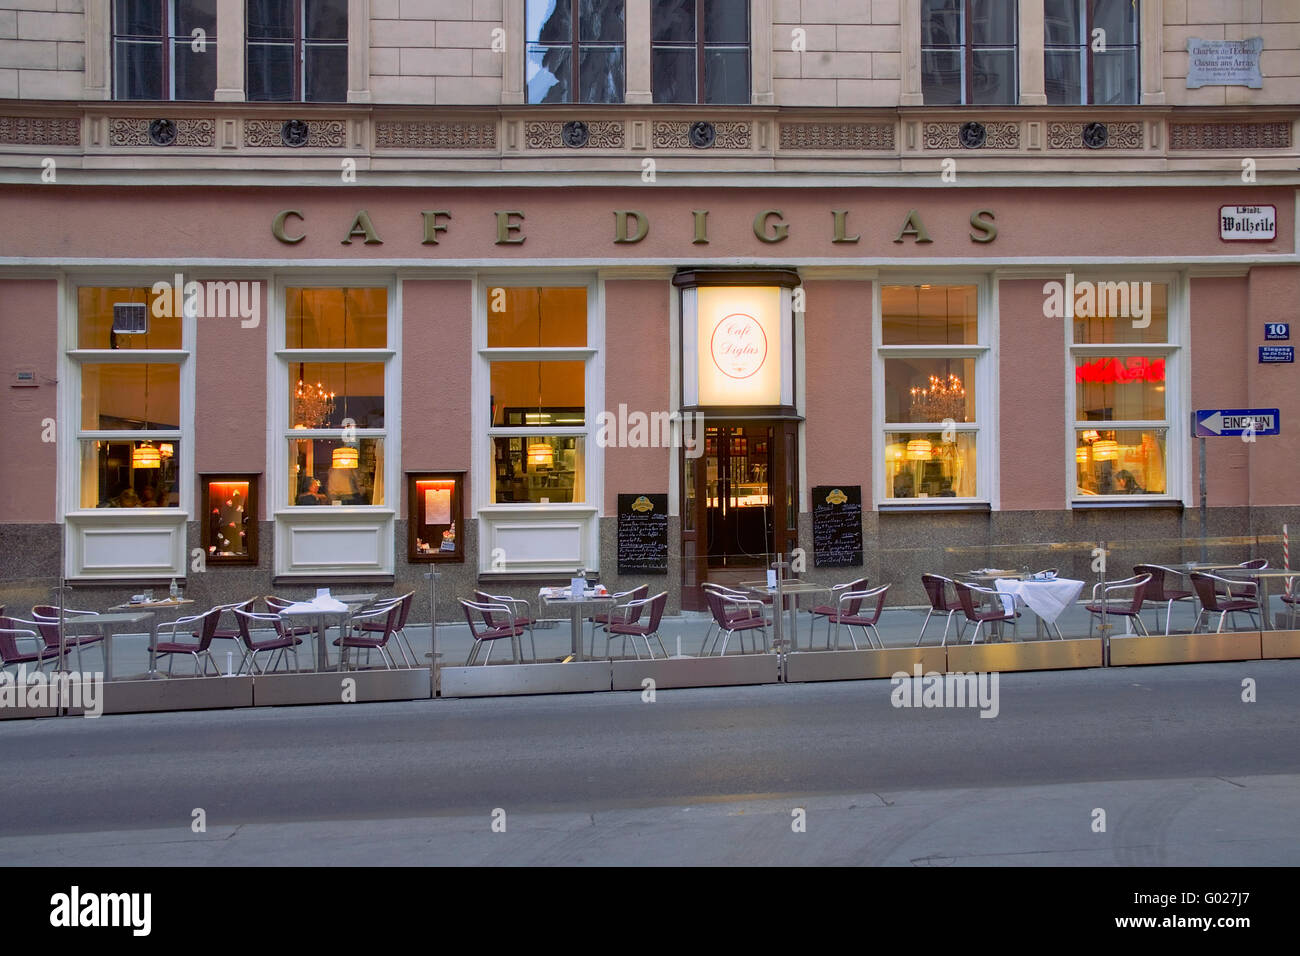 Cafe diglas wollzeile austria vienna hi-res stock photography and images -  Alamy